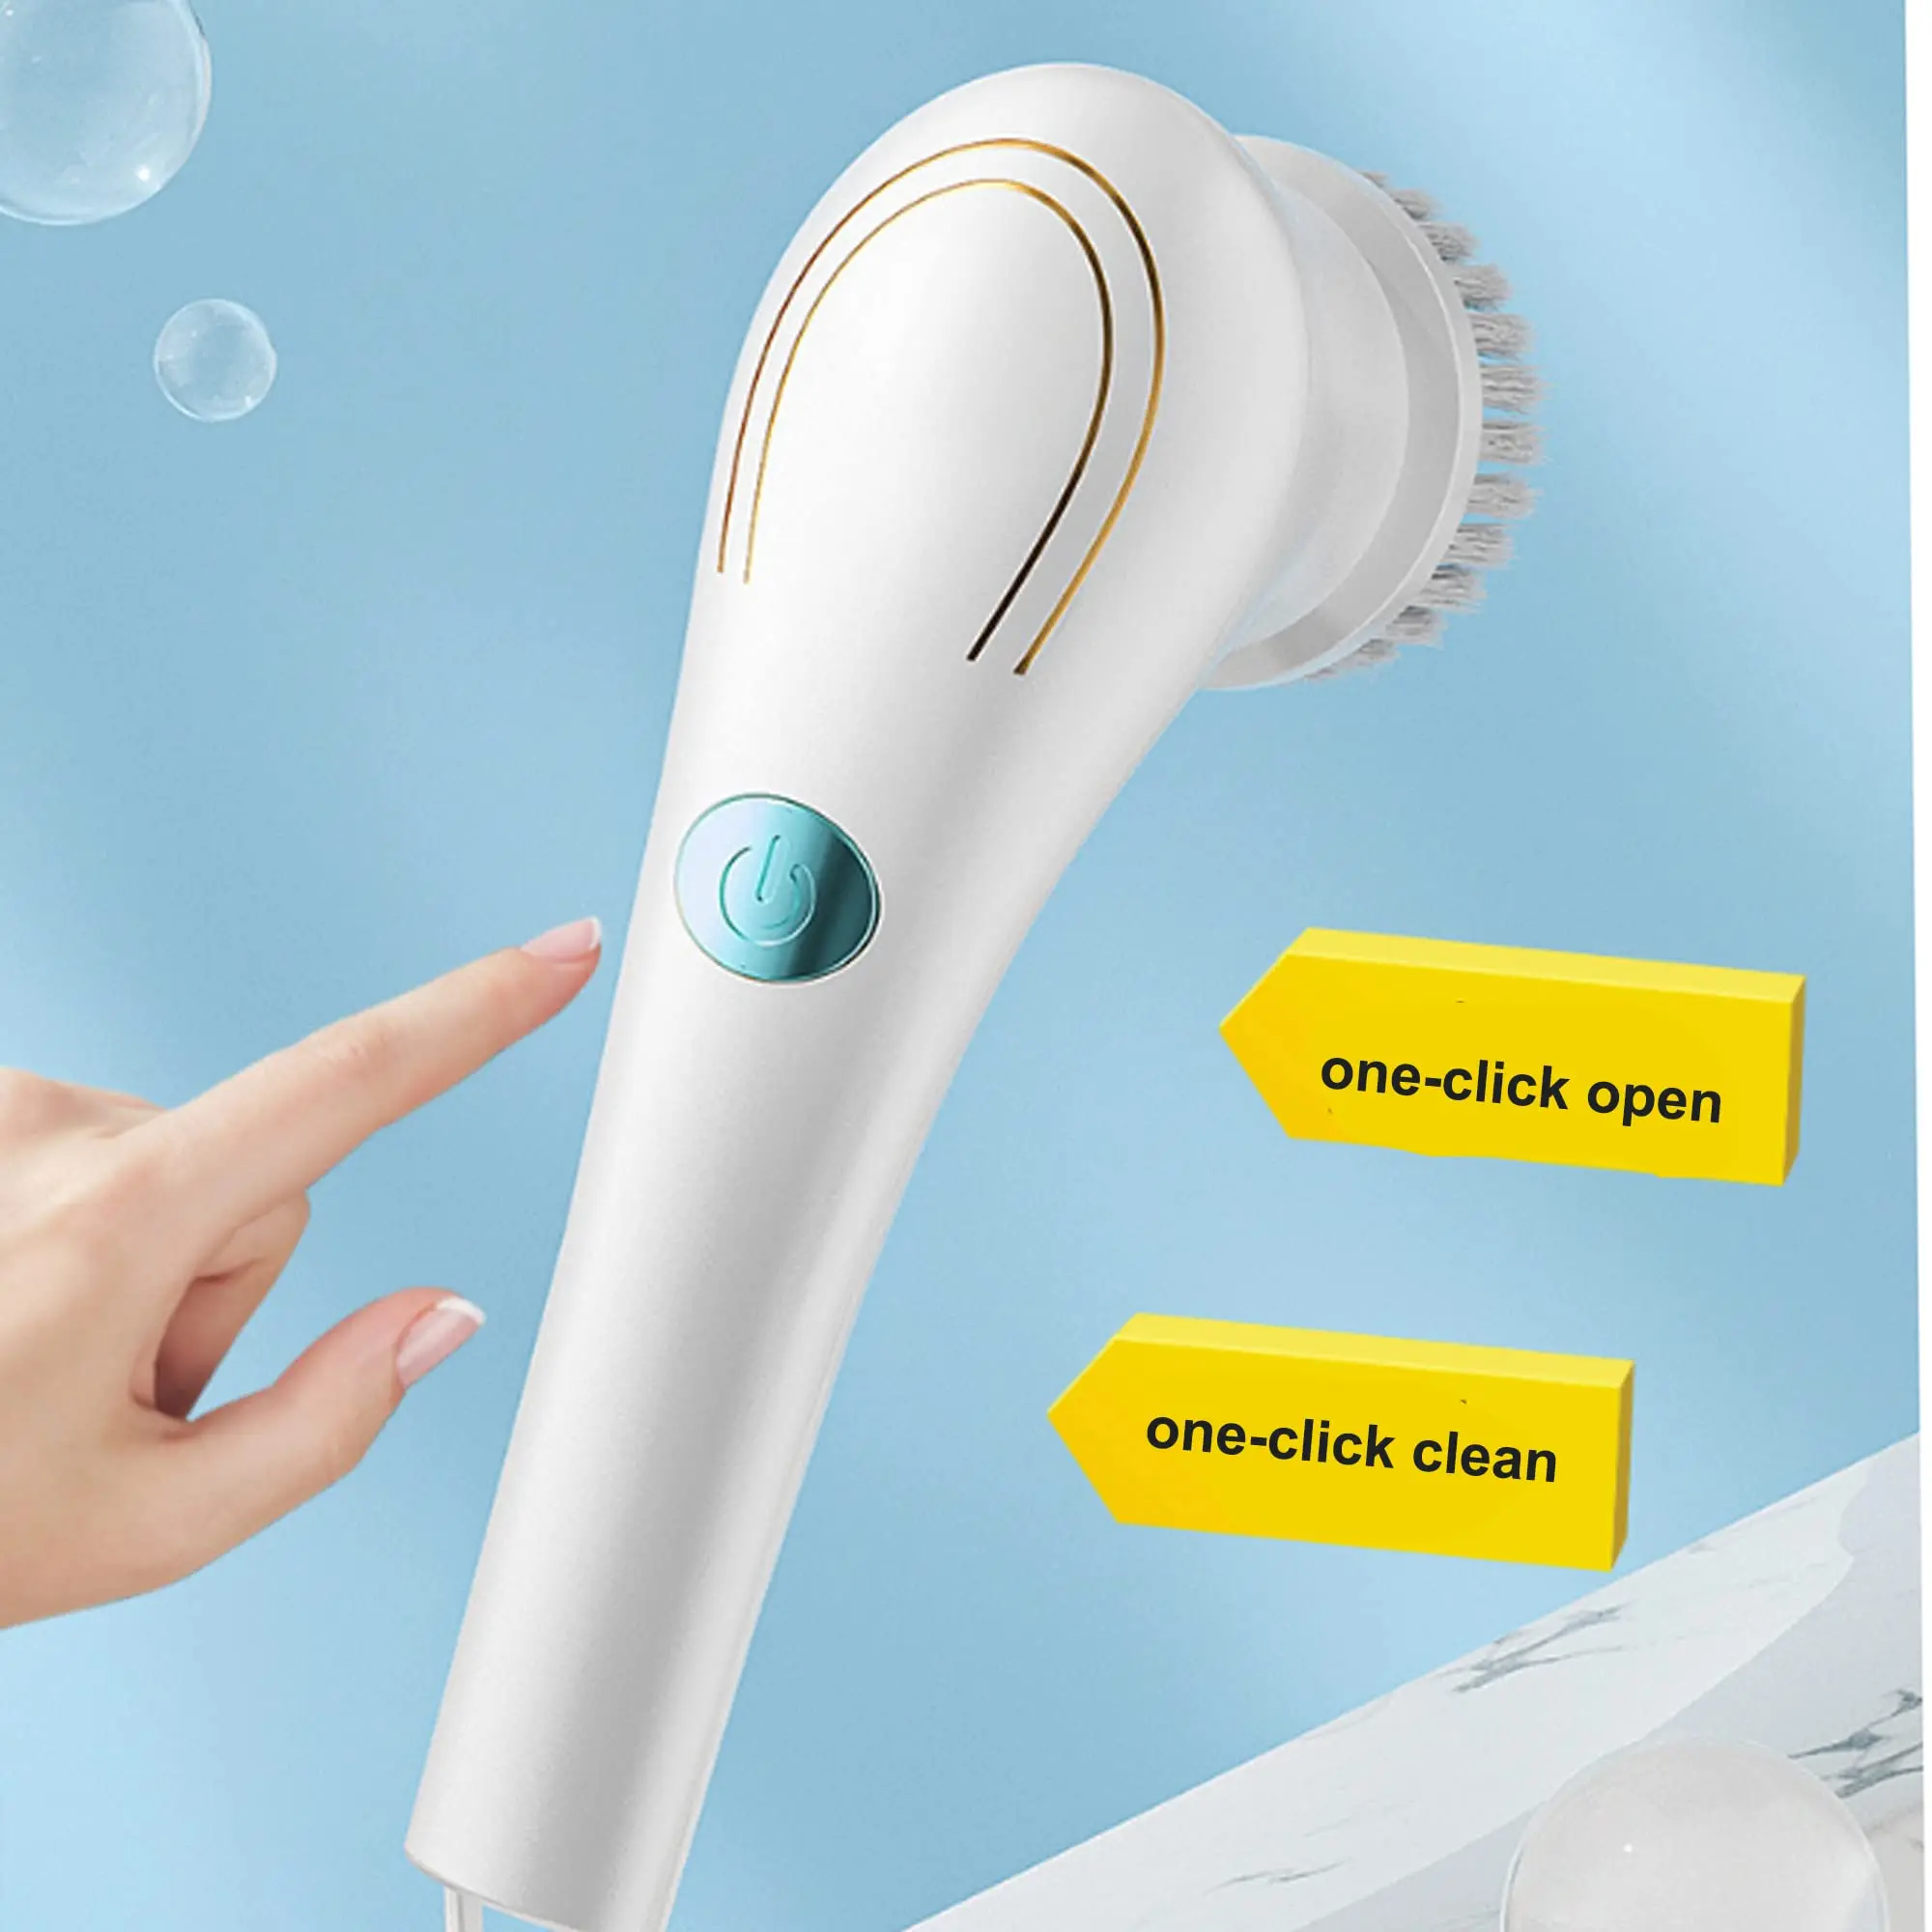 S4fc3f8a25e4741c4a8668d4c4562eba6y USB Rechargeable 360° Electric Spin Scrubber Cordless Handheld Scrubber with 5 Replaceable Brush Heads, Electric Floor Scrubber